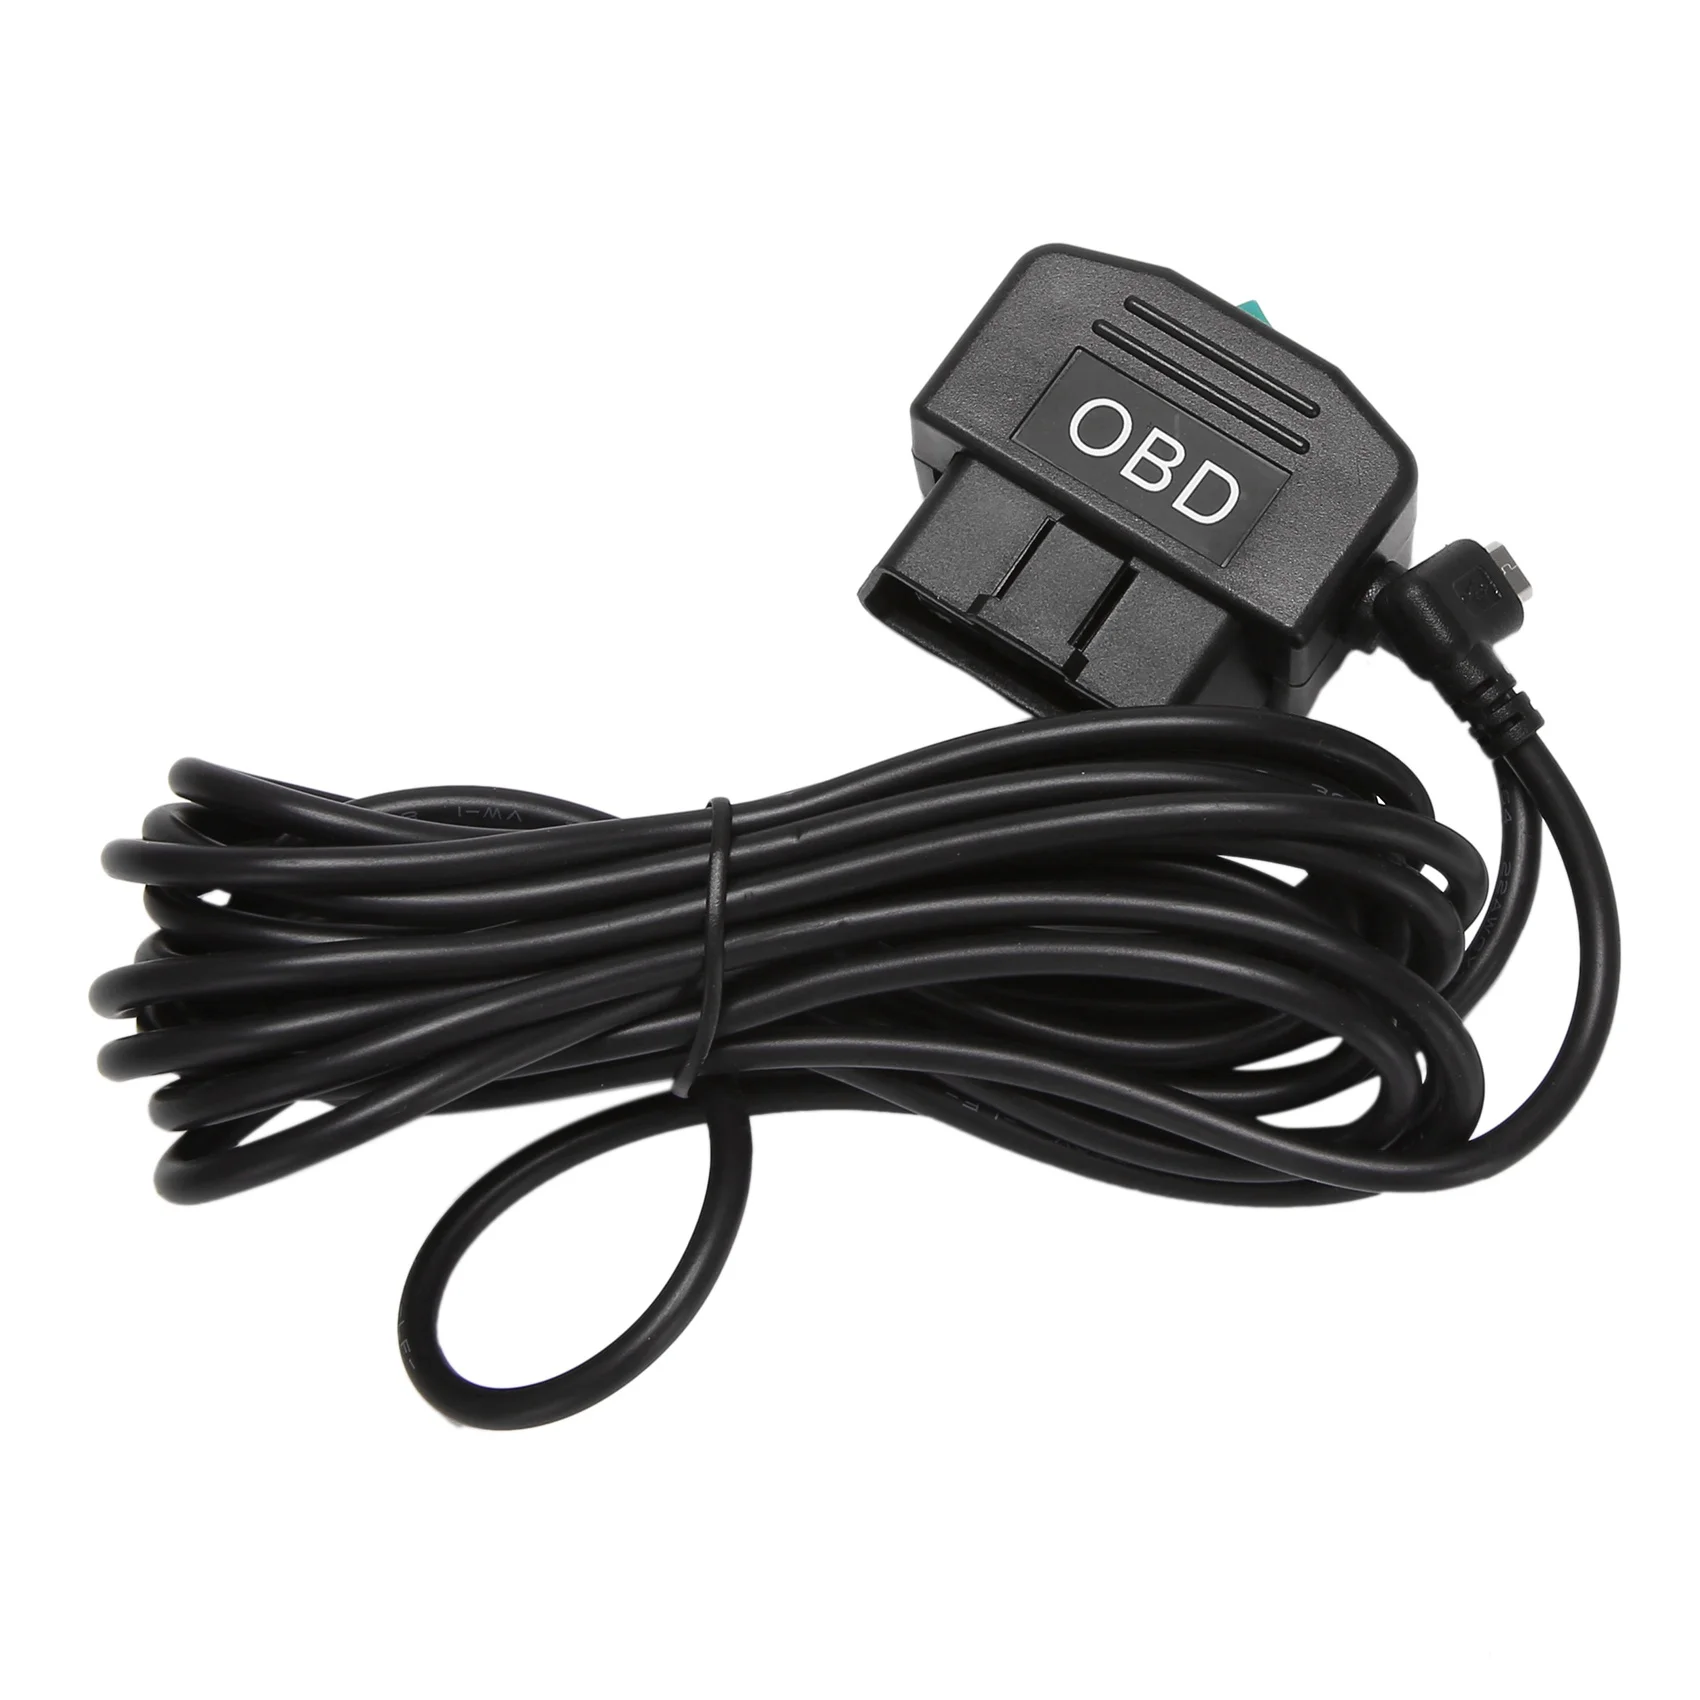 

Output 5V 3A USB Ports Car OBD Adapter Power Box 3.5 Meters Cable Switch Line for DVR Charging